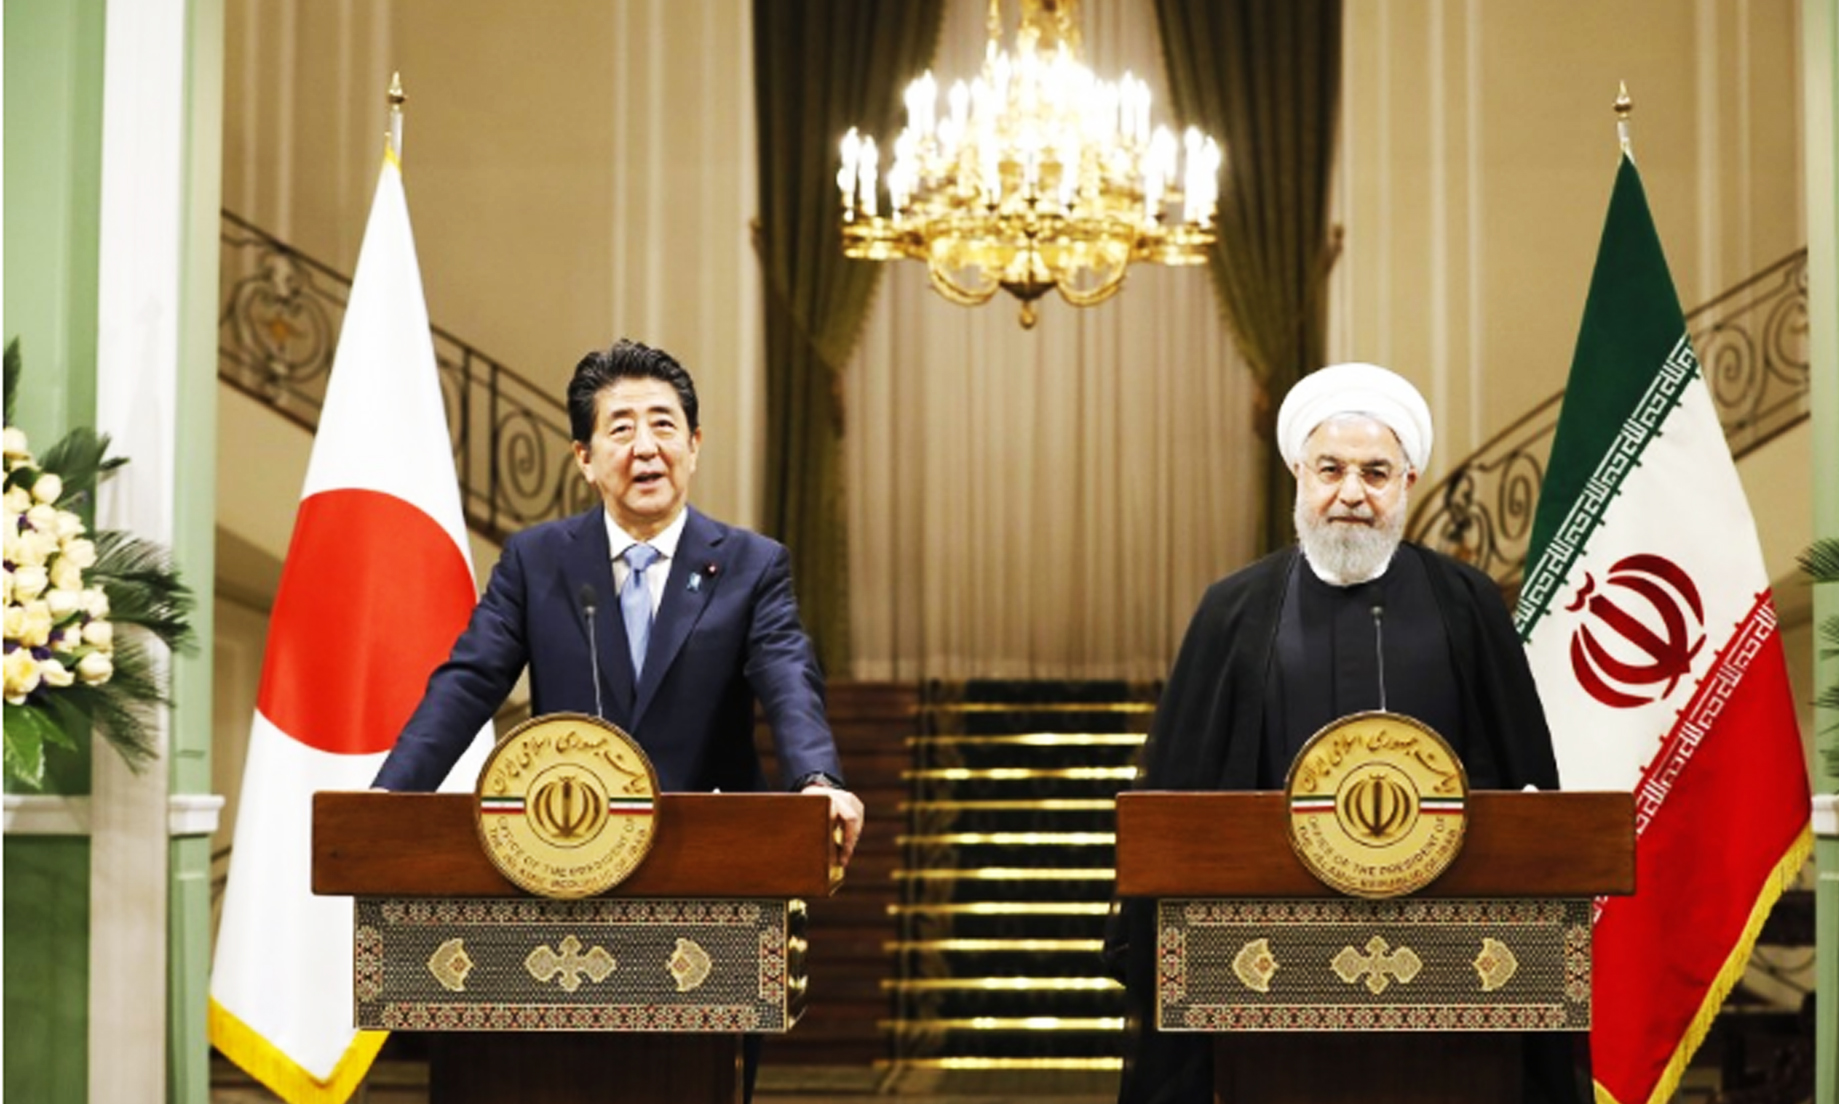 Japan’s Abe urges Rouhani to avoid escalation of Iran-U.S. tensions